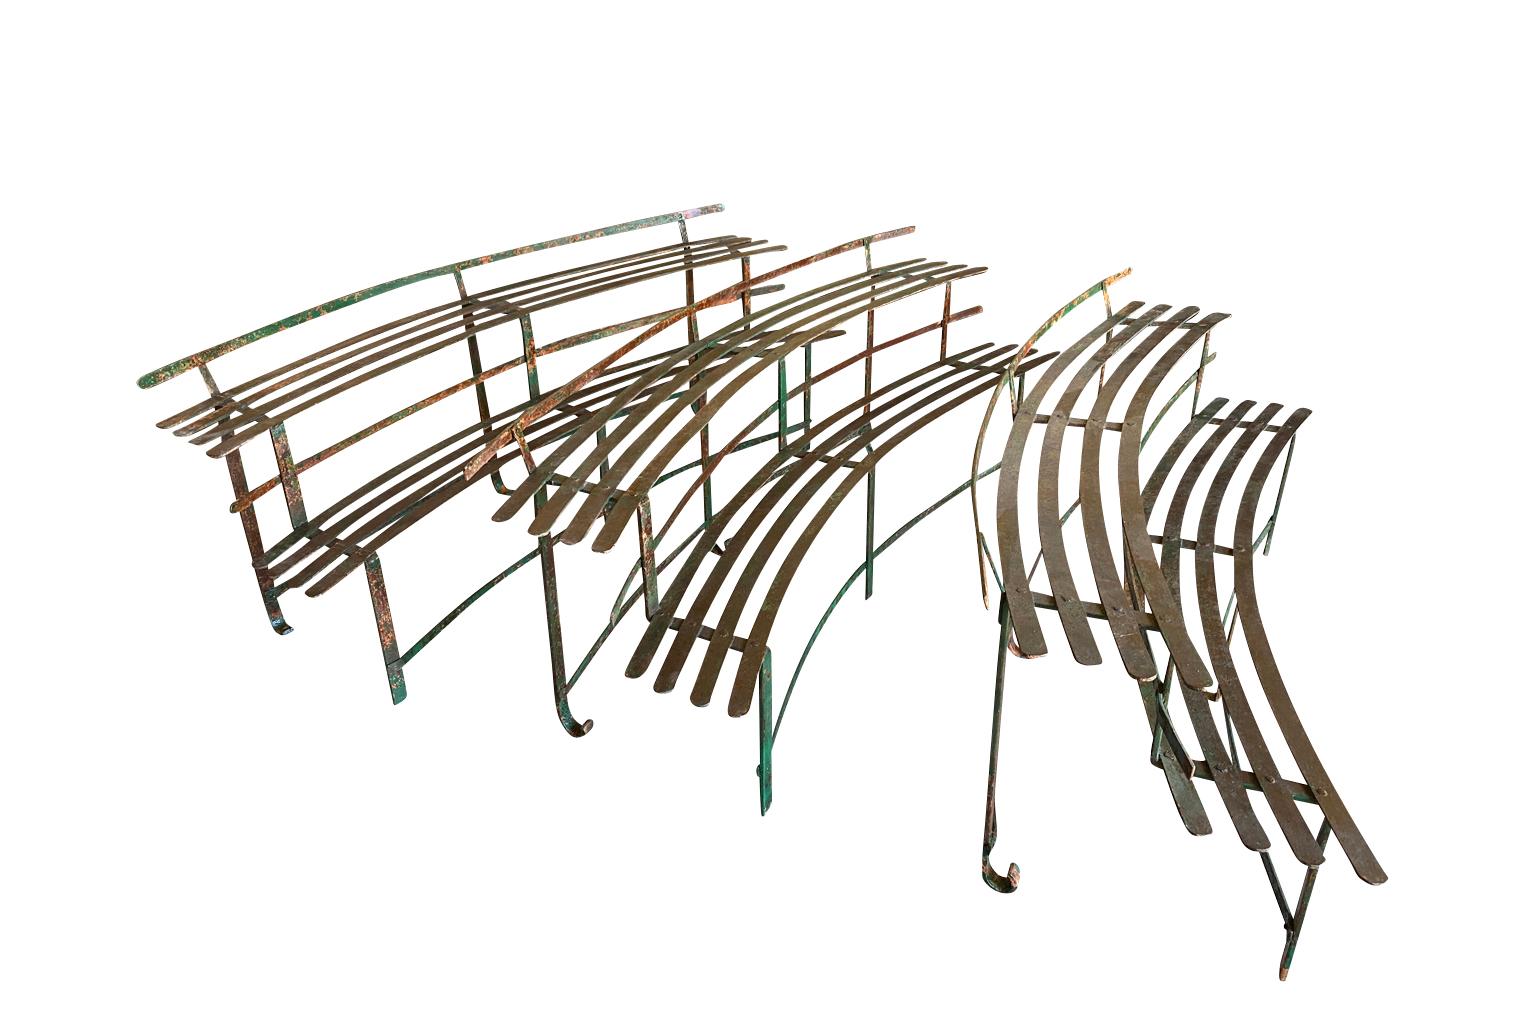 A terrific set of 3 Italian semicircular shaped Plant Display Stands - Benches.  Wonderfully crafted from painted iron.  Very weighty and excellent quality.